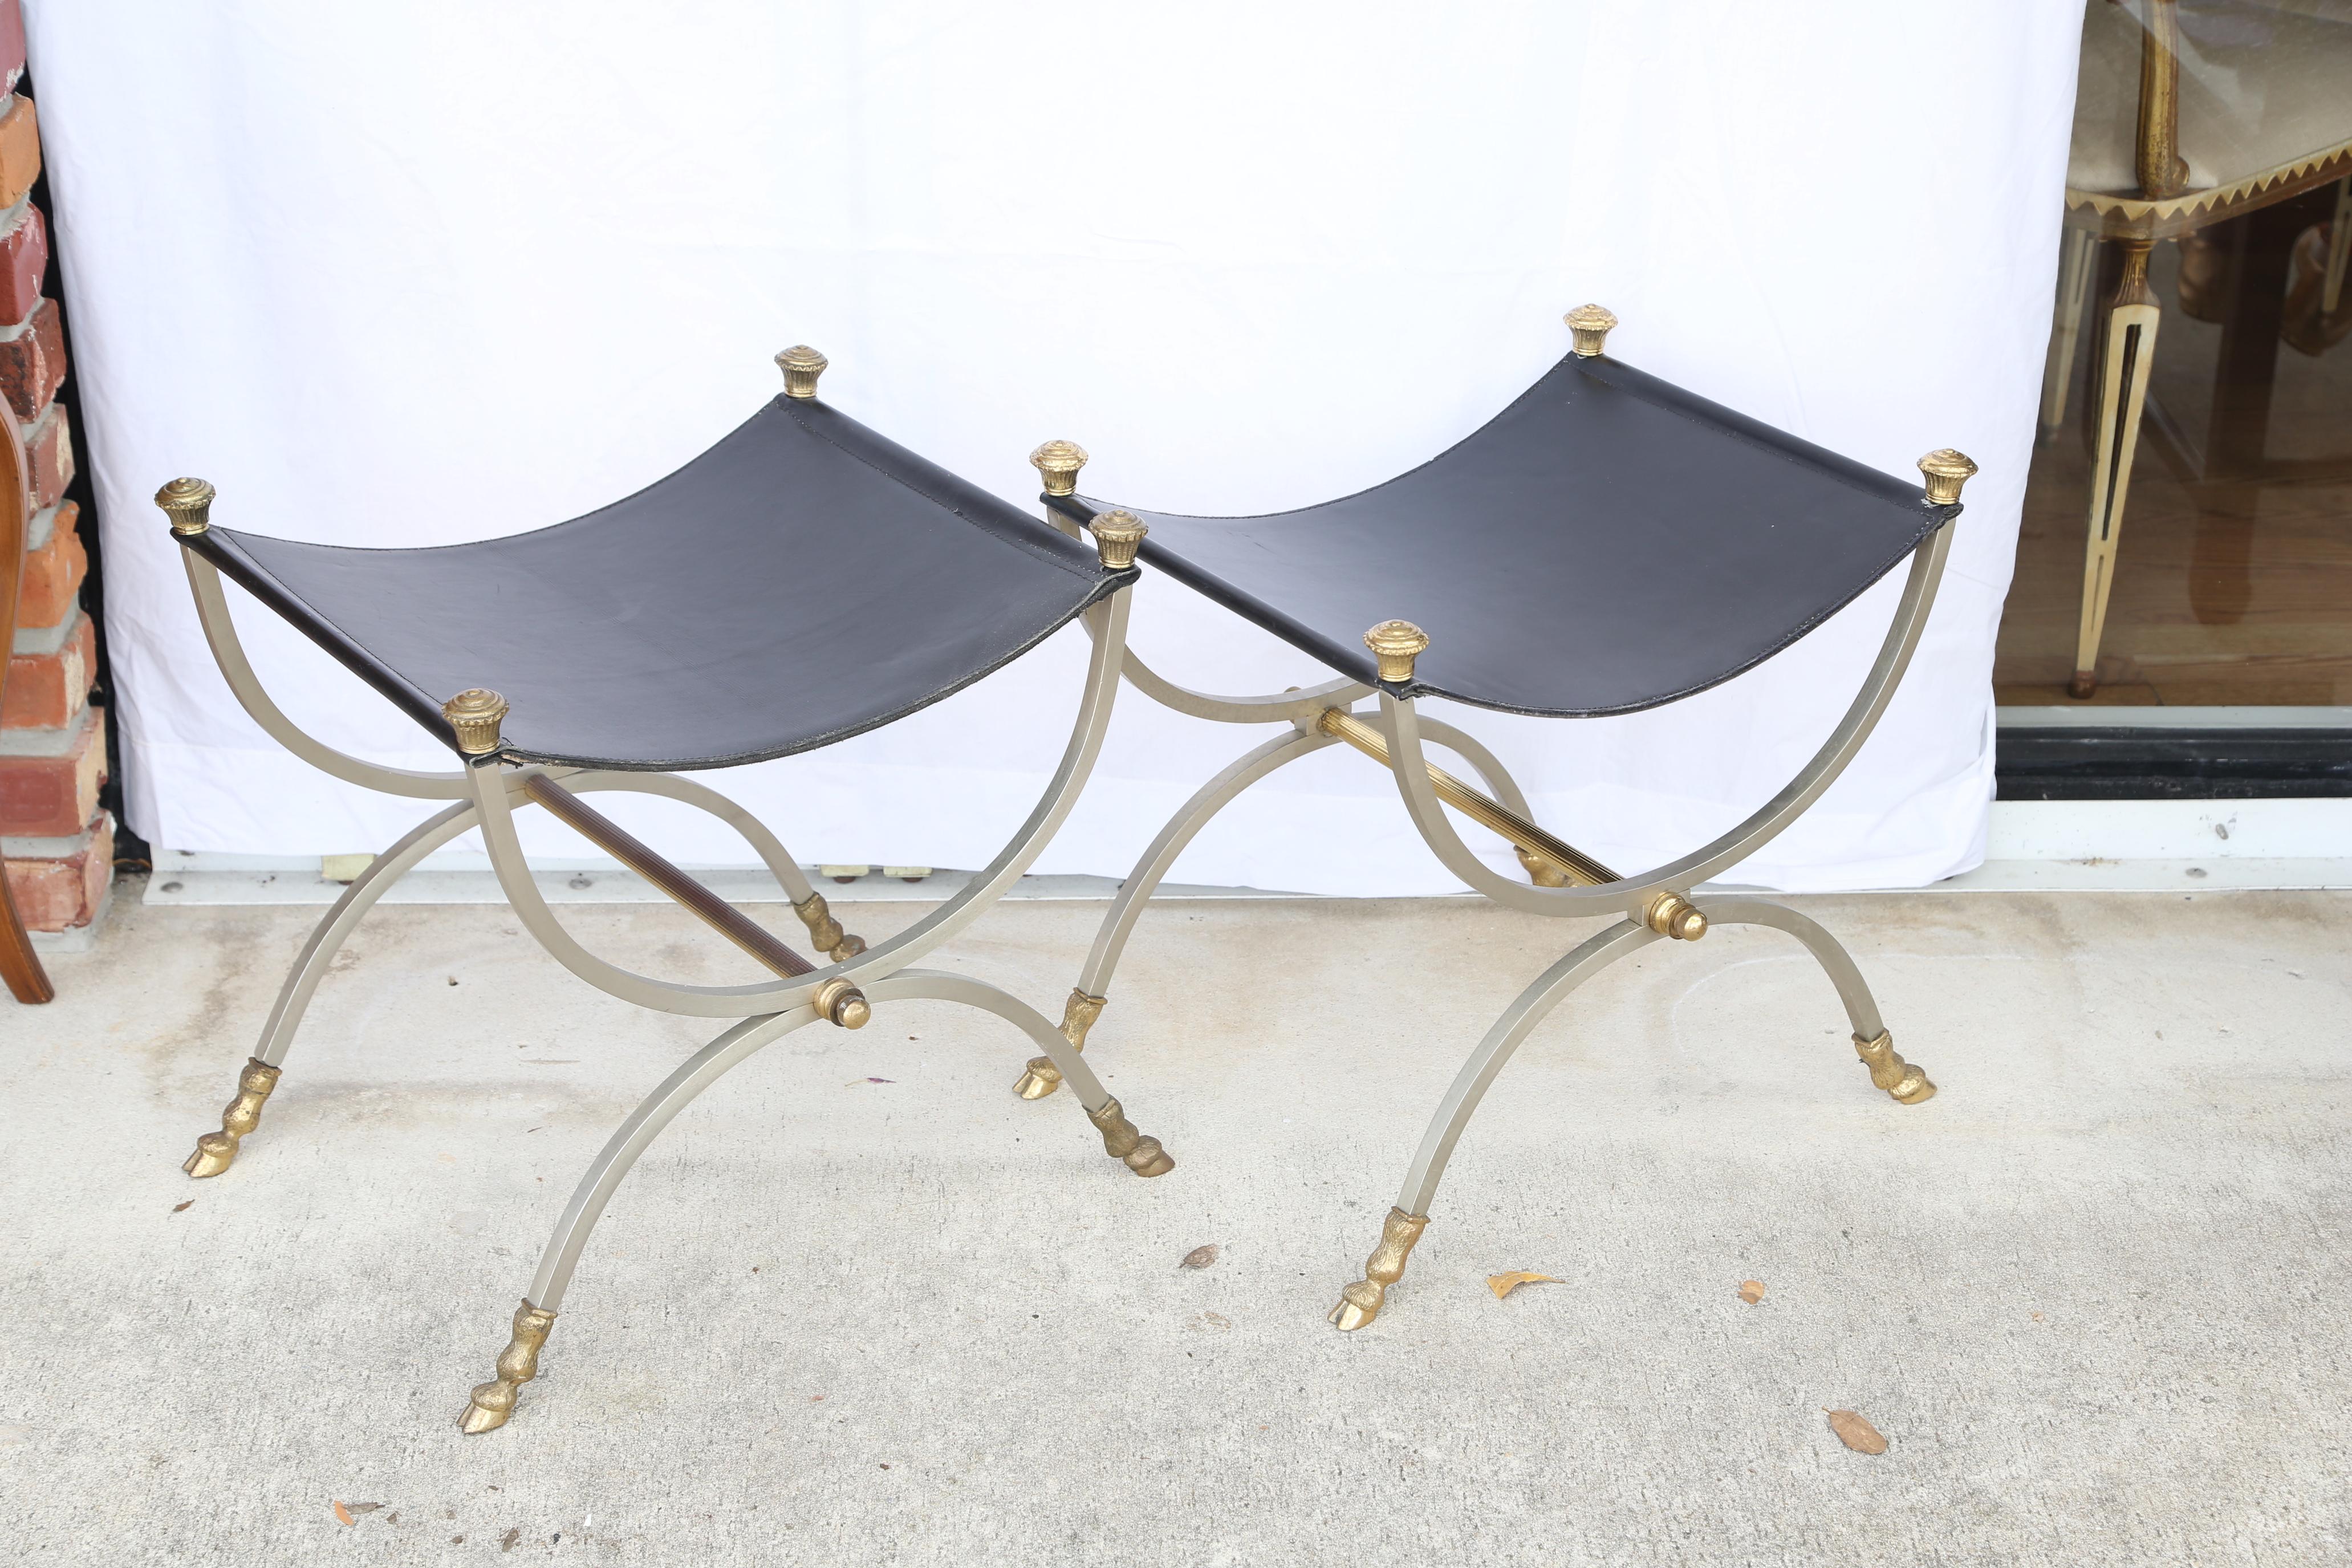 Pair of brushed steel and brass Campaign benches with black leather seats by Jansen.